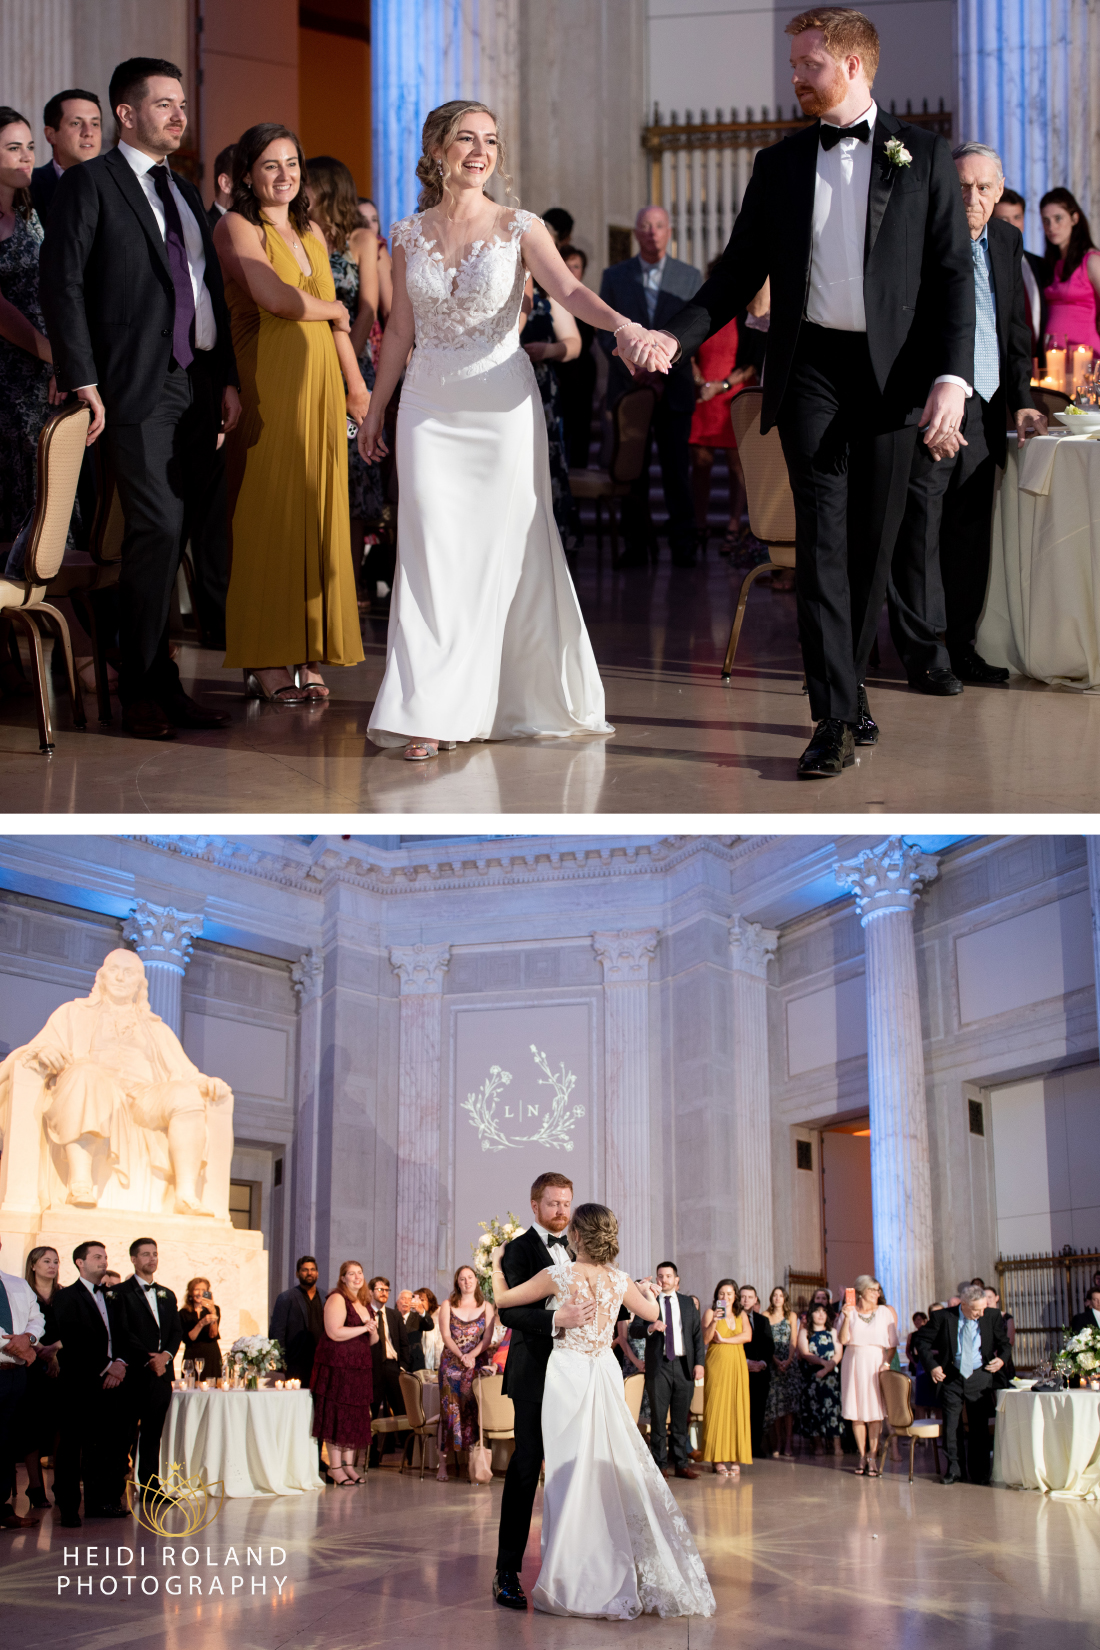 Bride and groom having their first dance in the main hall of the Franklin Institute in Philly